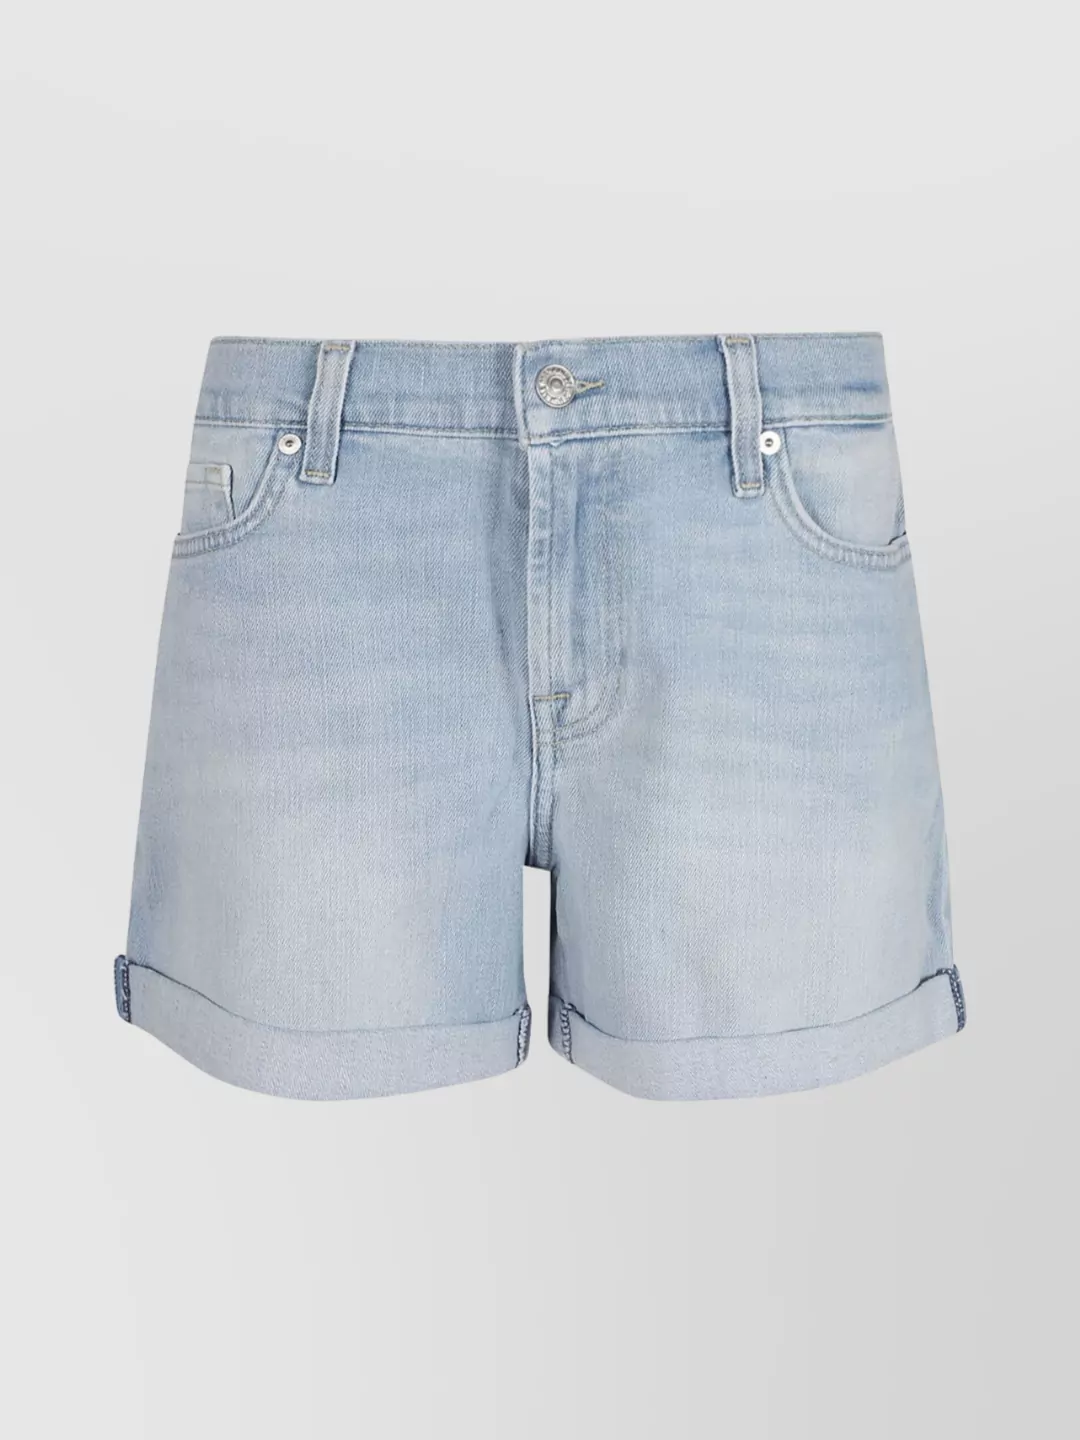 Shop 7 For All Mankind Roll Shorts With Belt Loops And Back Pockets